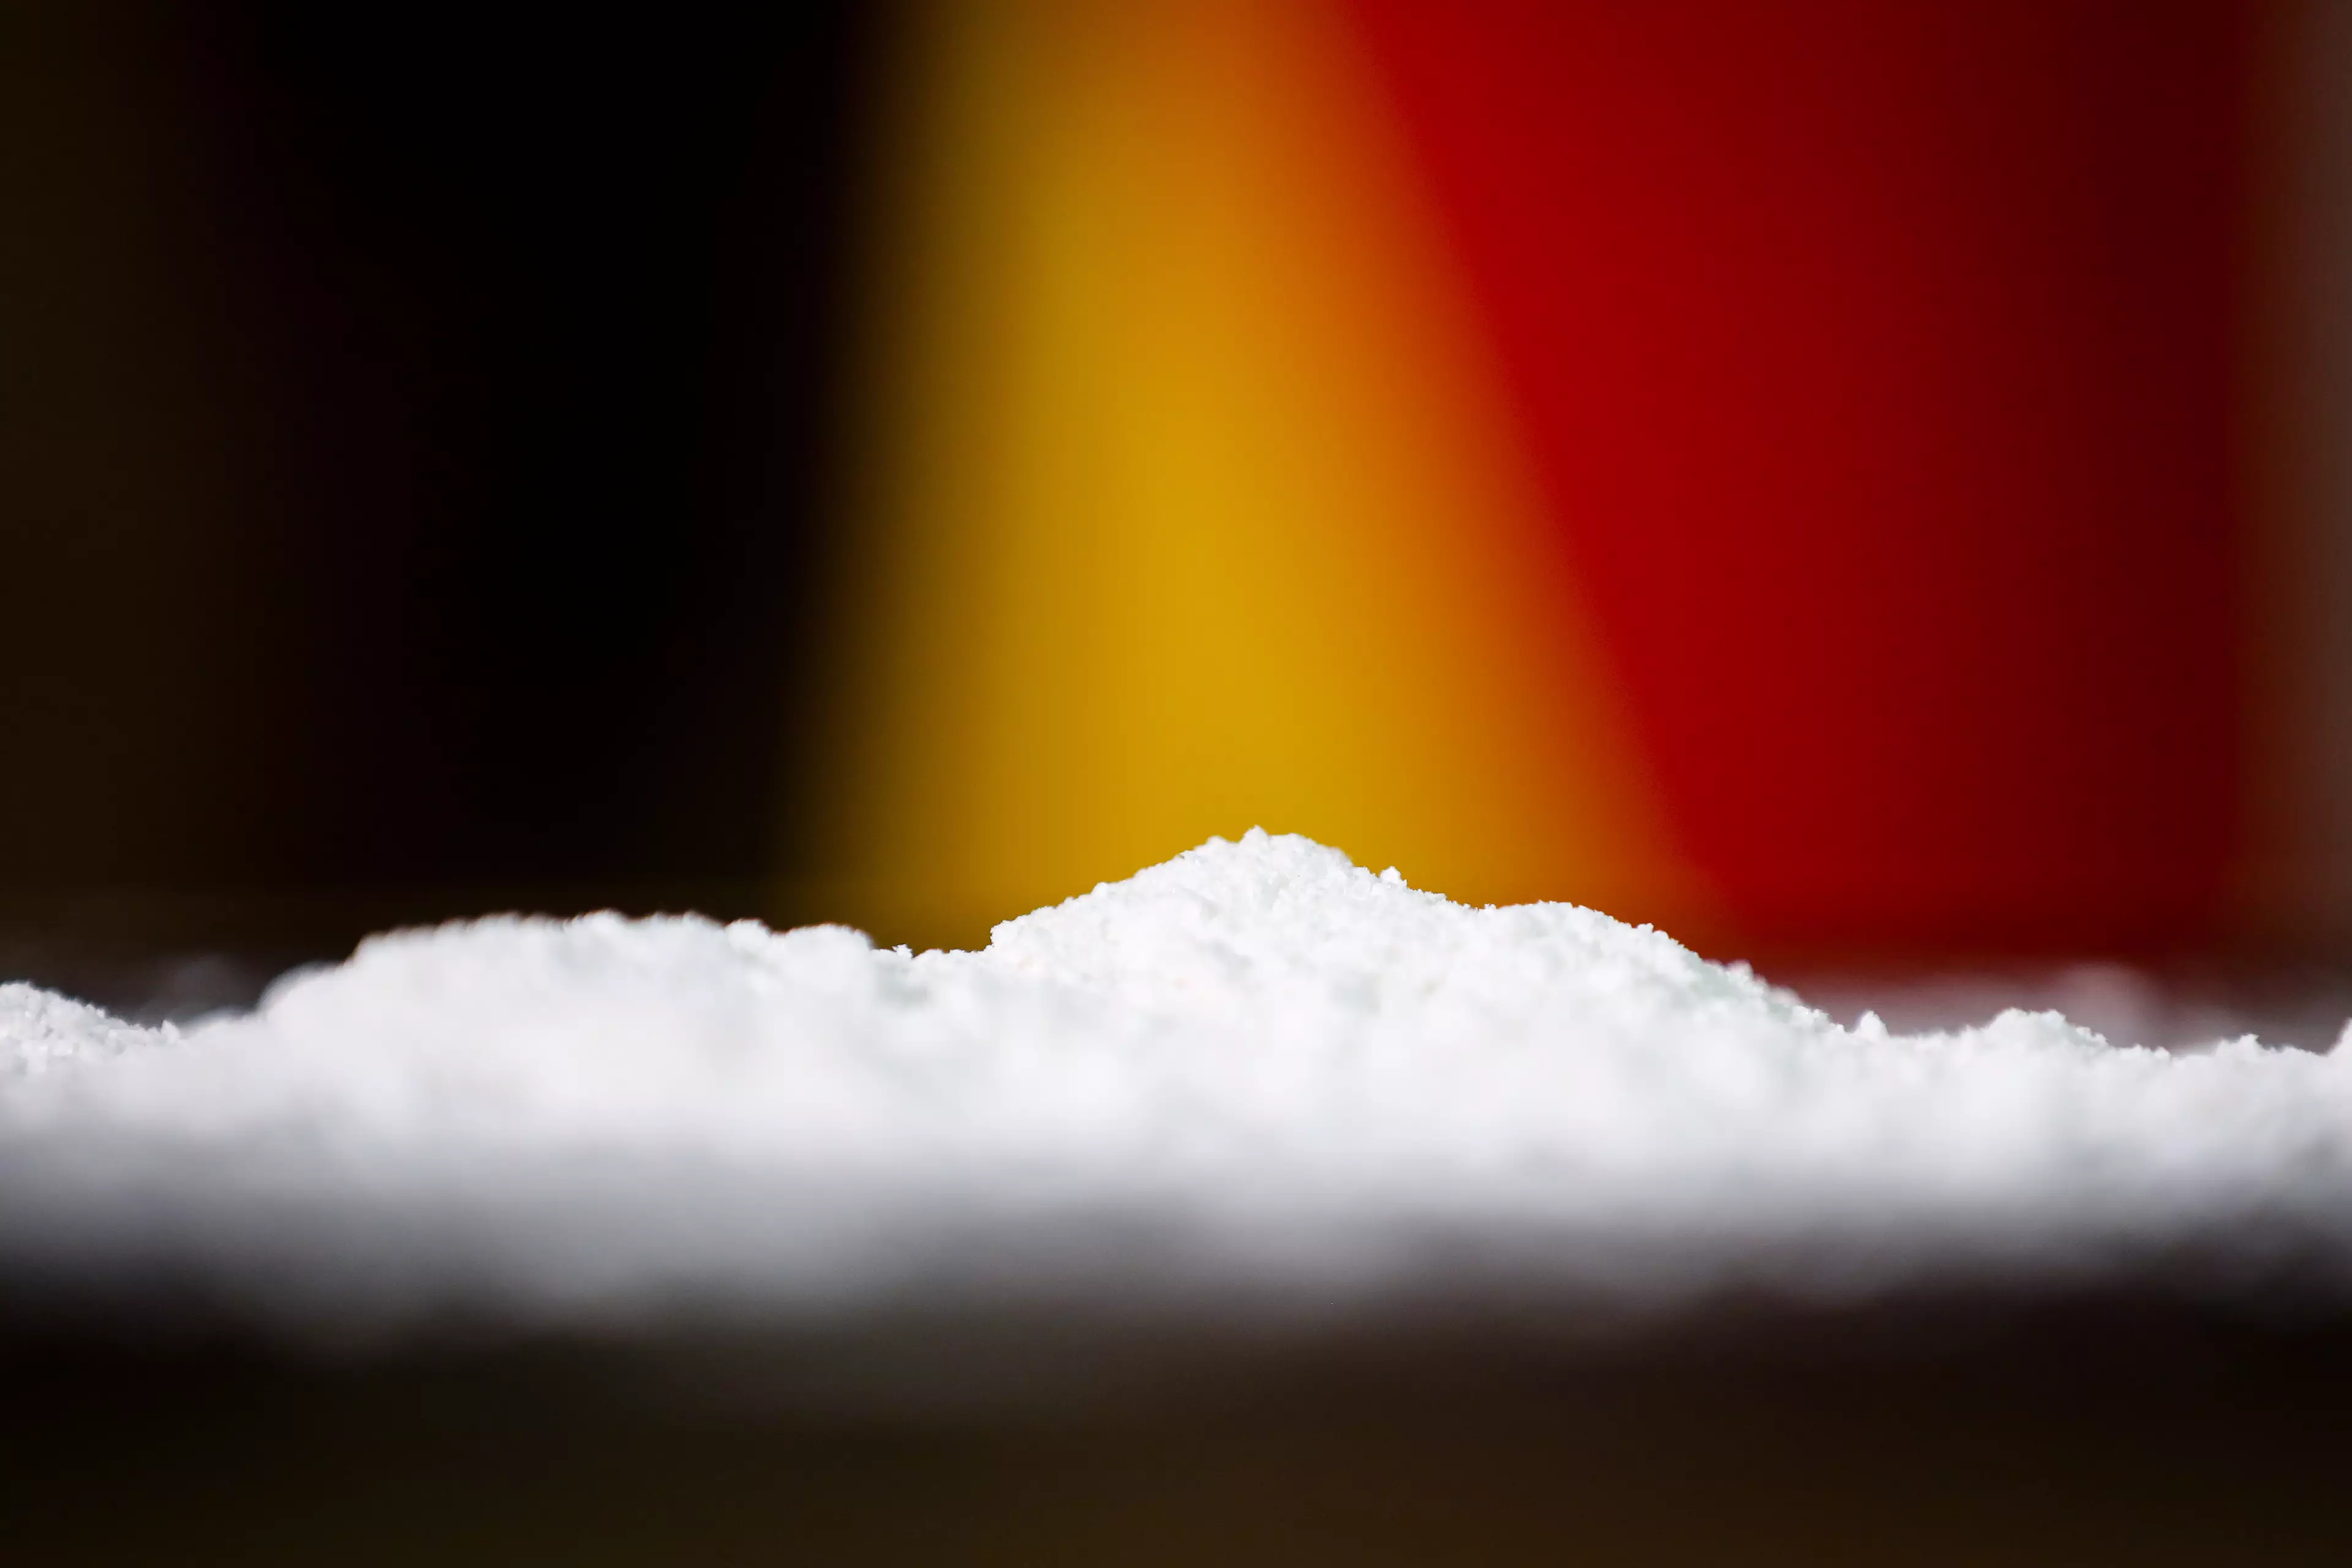 Illegal Drugs Are Being Sold On Websites Like Gumtree And Craigslist